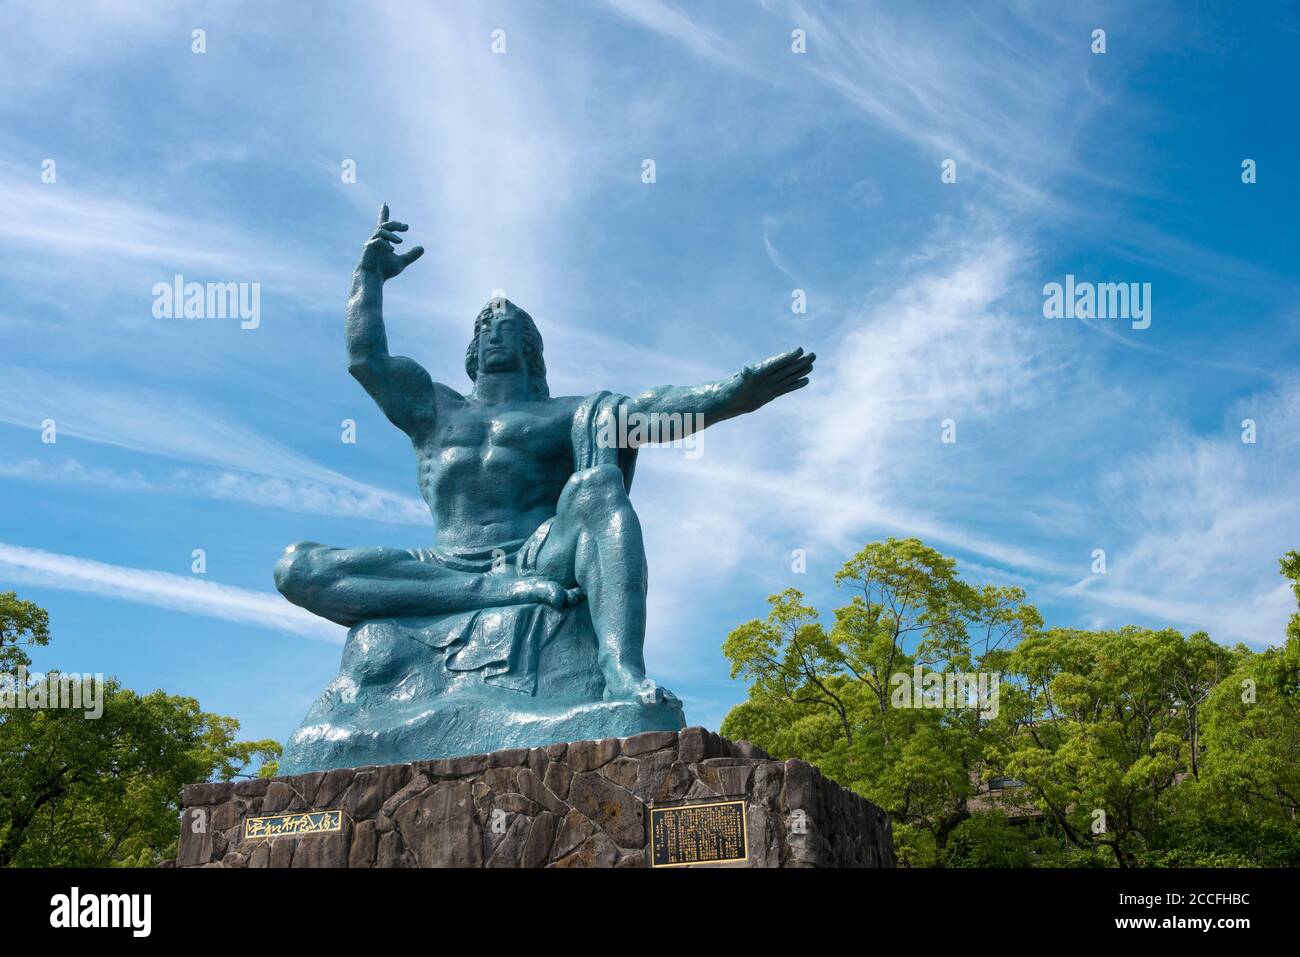 Peace Statue at Nagasaki Peace Park in Nagasaki, Japan. The Peace Park is commemorating the atomic bombing of the city on August 9, 1945 during WWII. Stock Photo